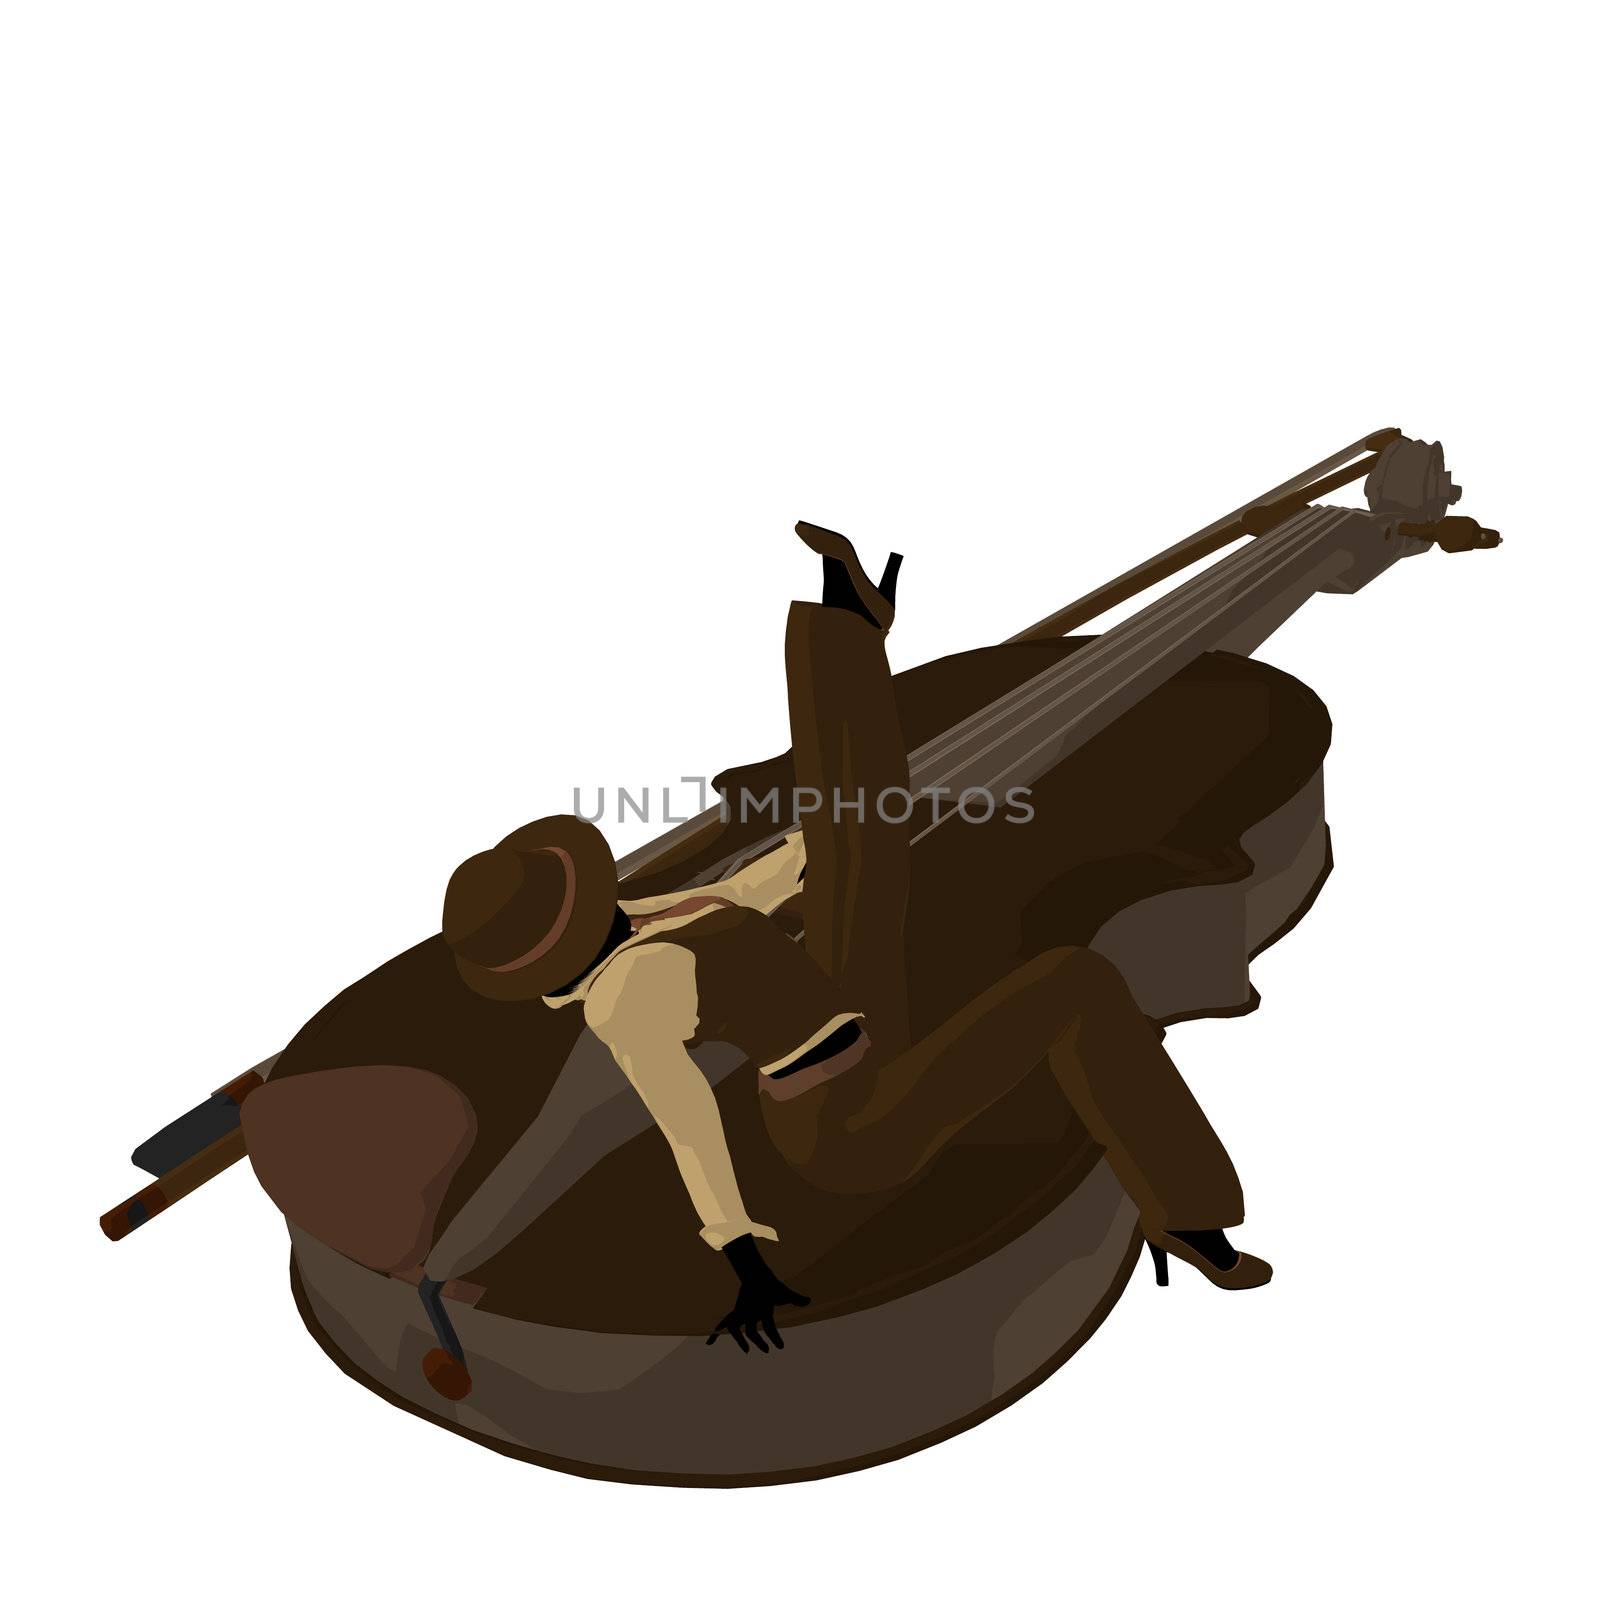 Female jazz player on a violin illustration silhouette on a white background